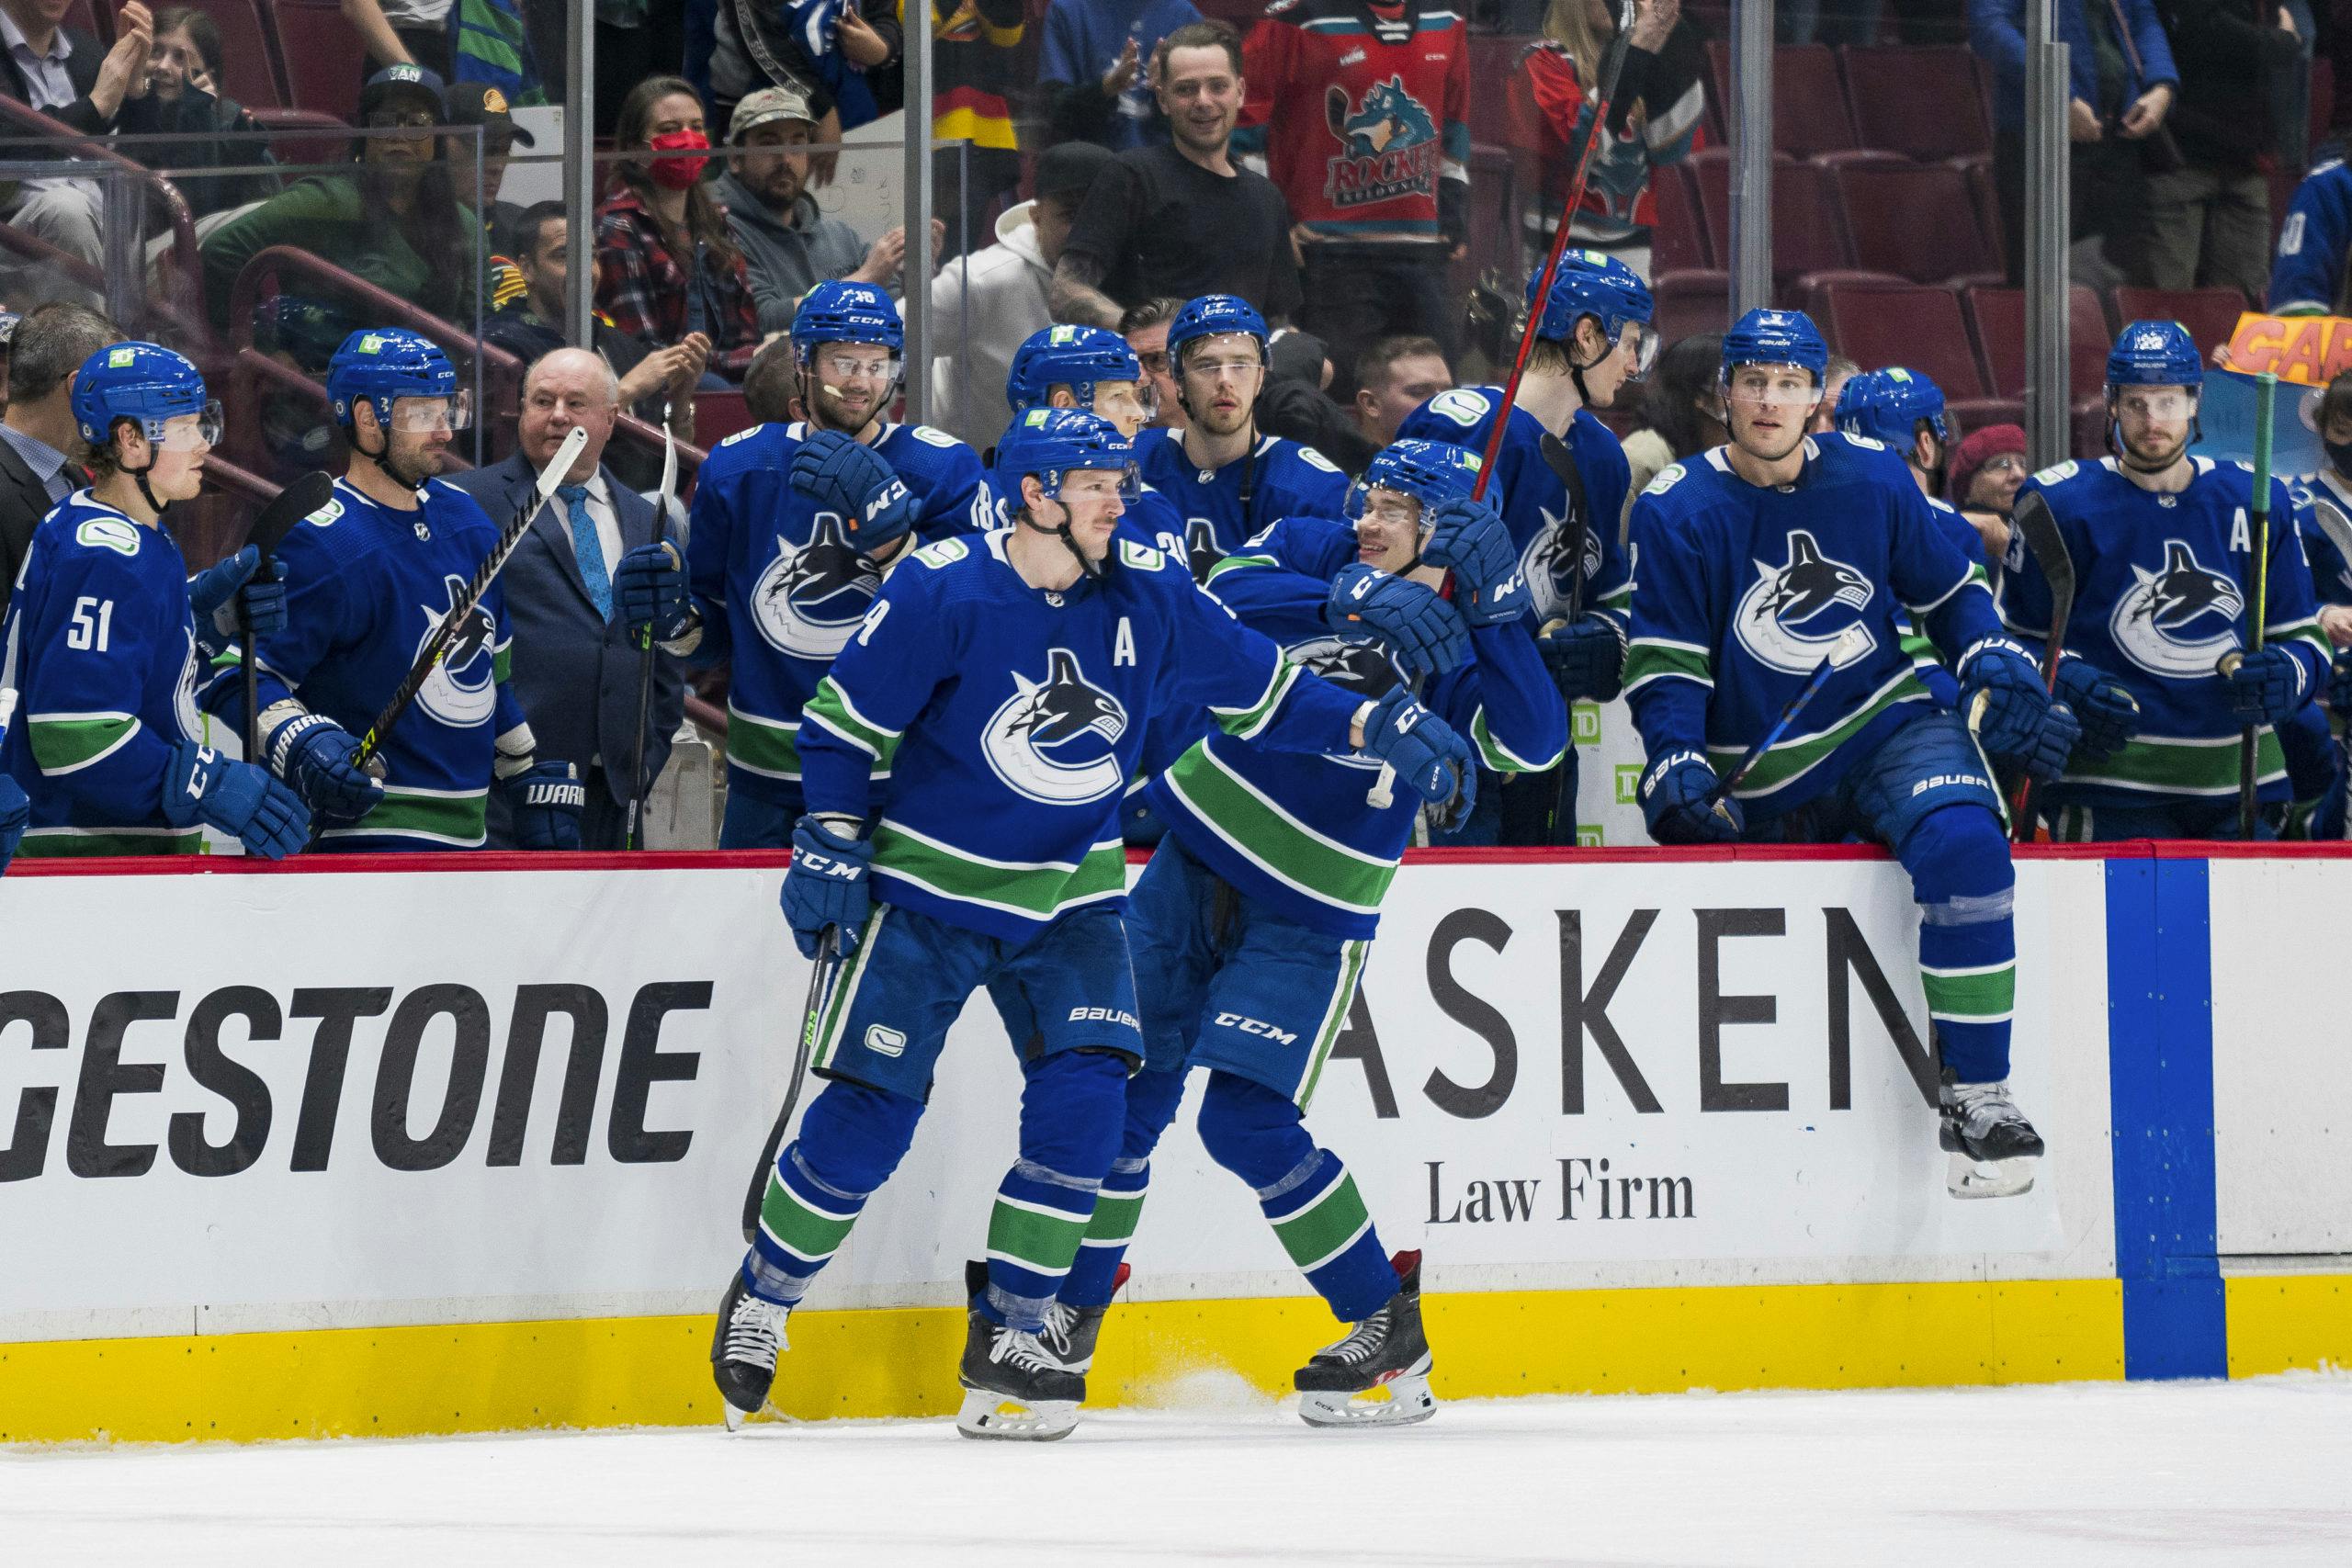 Canucks: Five things to look forward to in the 2021-22 season